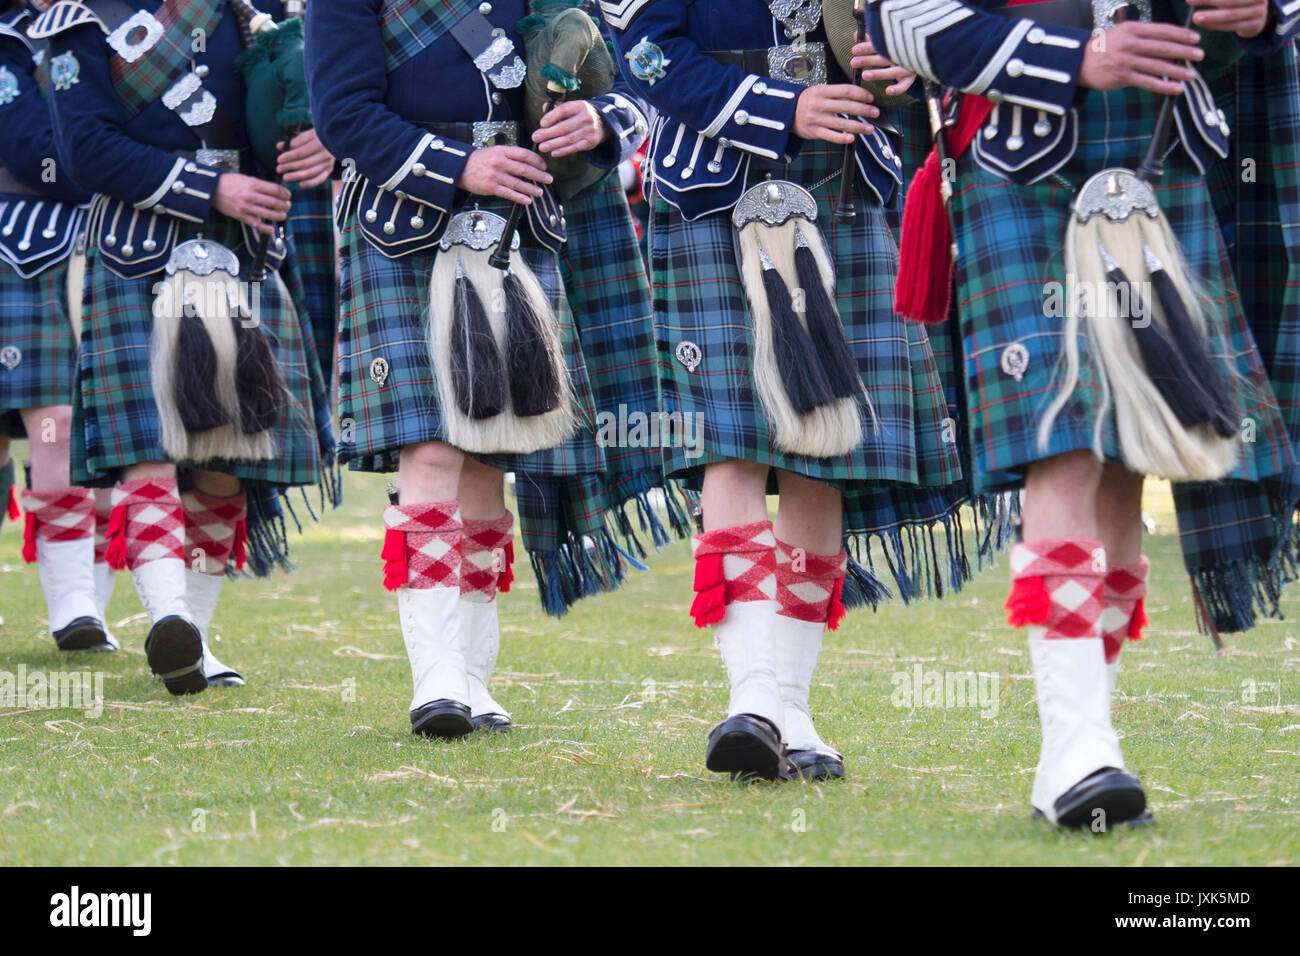 Ballater, Scotland - August 10th, 2017: The Ballater Pipe Band 'Beating the Retreat' in the town square after the Highland Games. Stock Photo